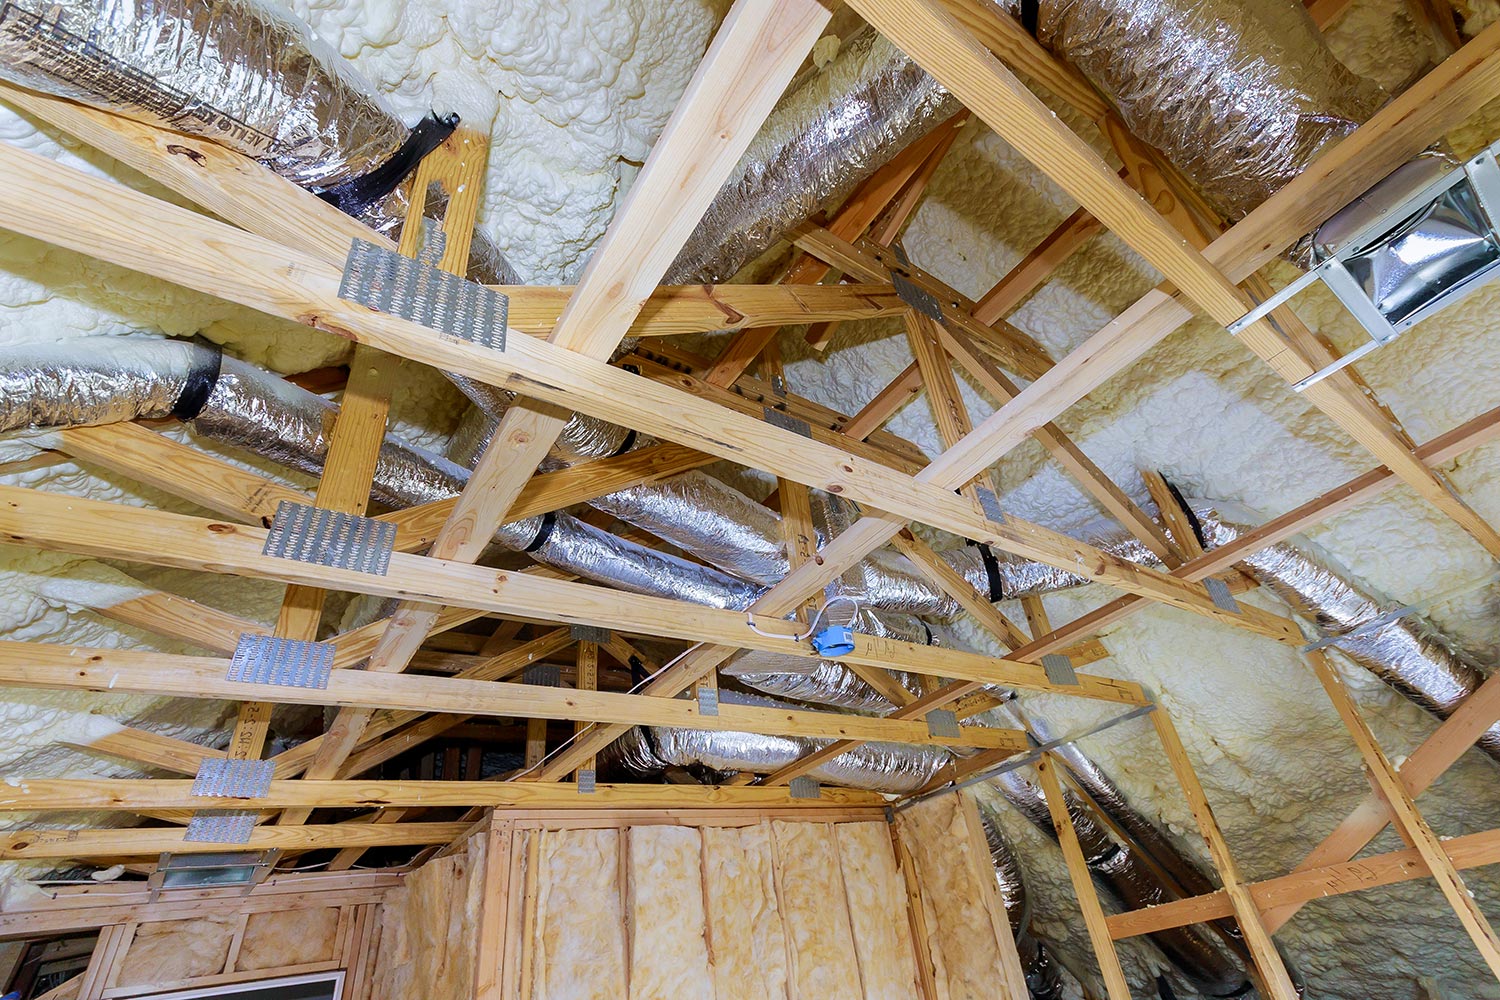 Installing attic insulation material is sprayed with liquid foam of heating system air condition system on the roof